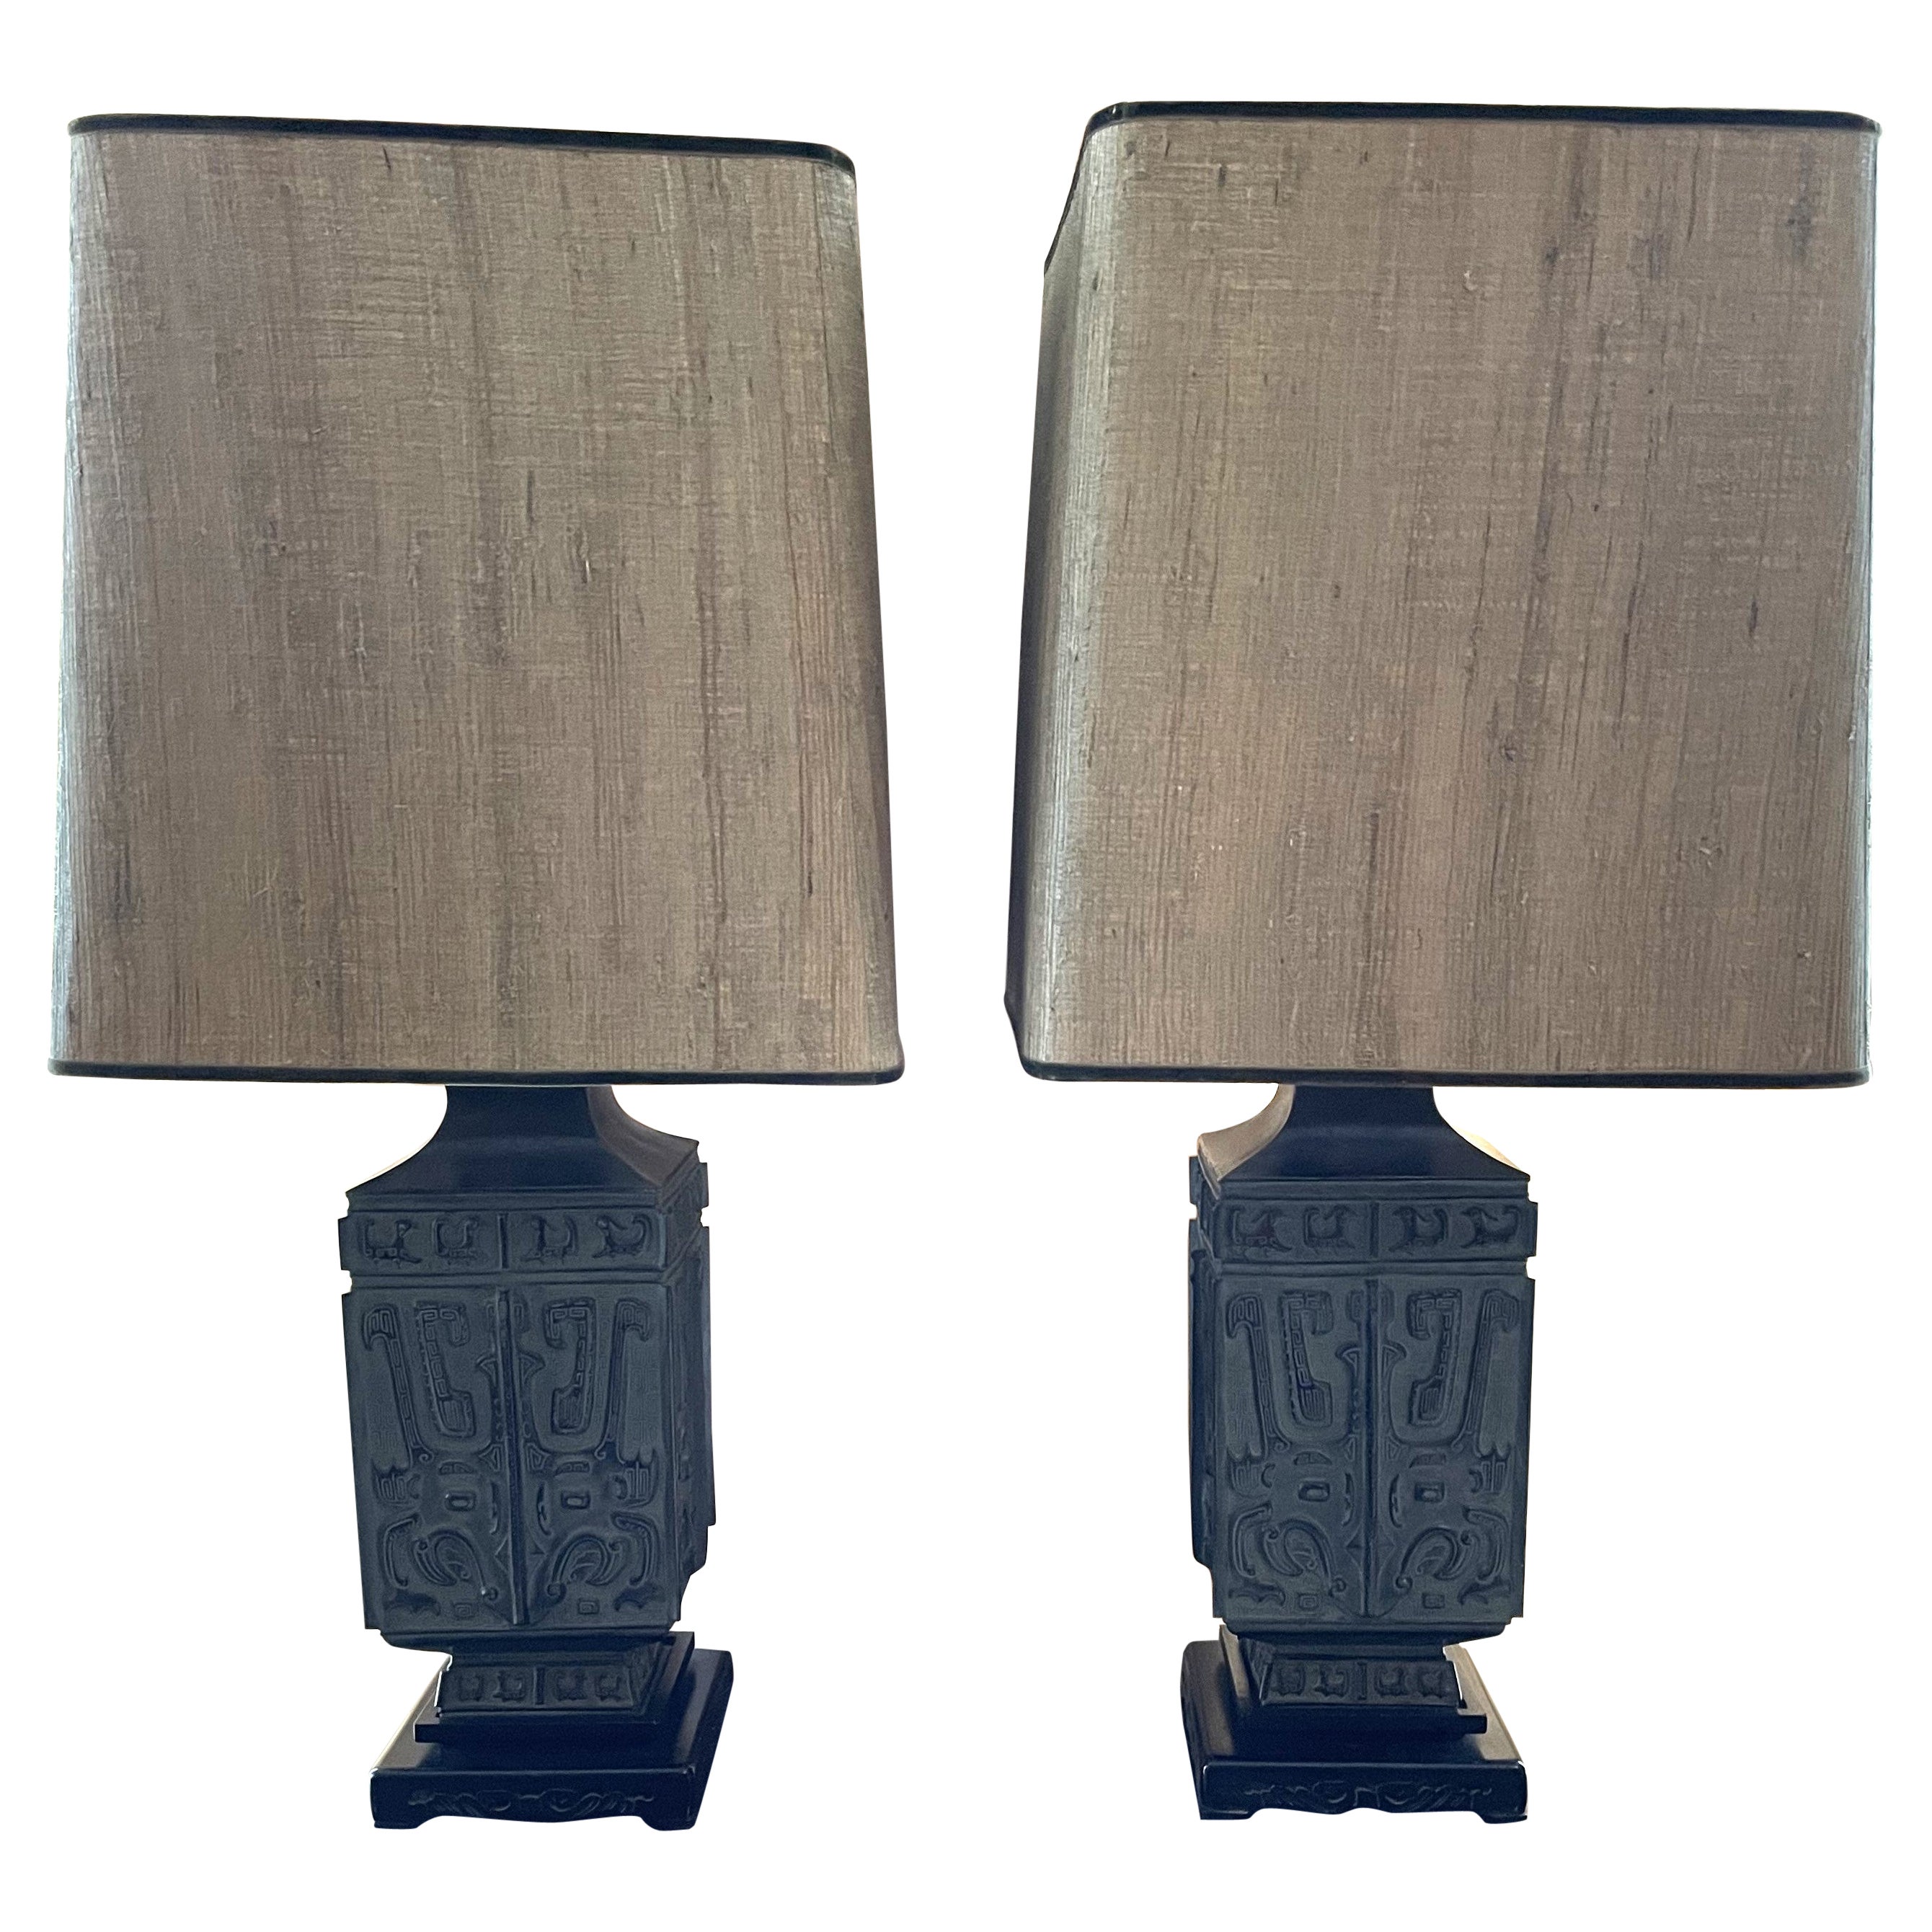 Qing Dynasty Cast-Bronze Table Lamps with Green Grass Cloth Shades